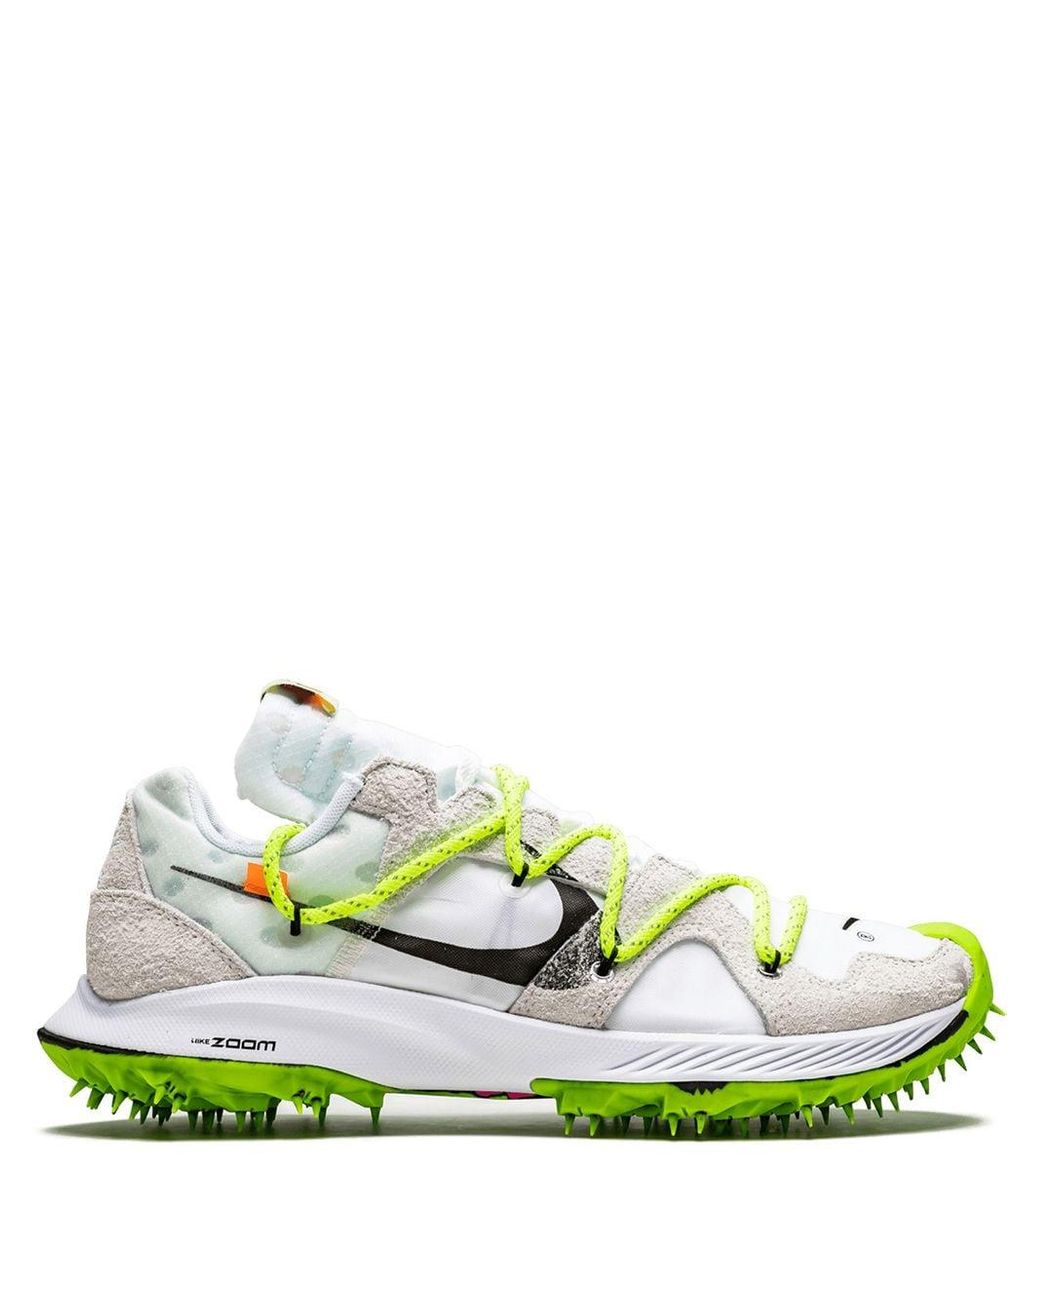 X OFF-WHITE Zoom Terra Kiger 5 Sneakers in White | Lyst